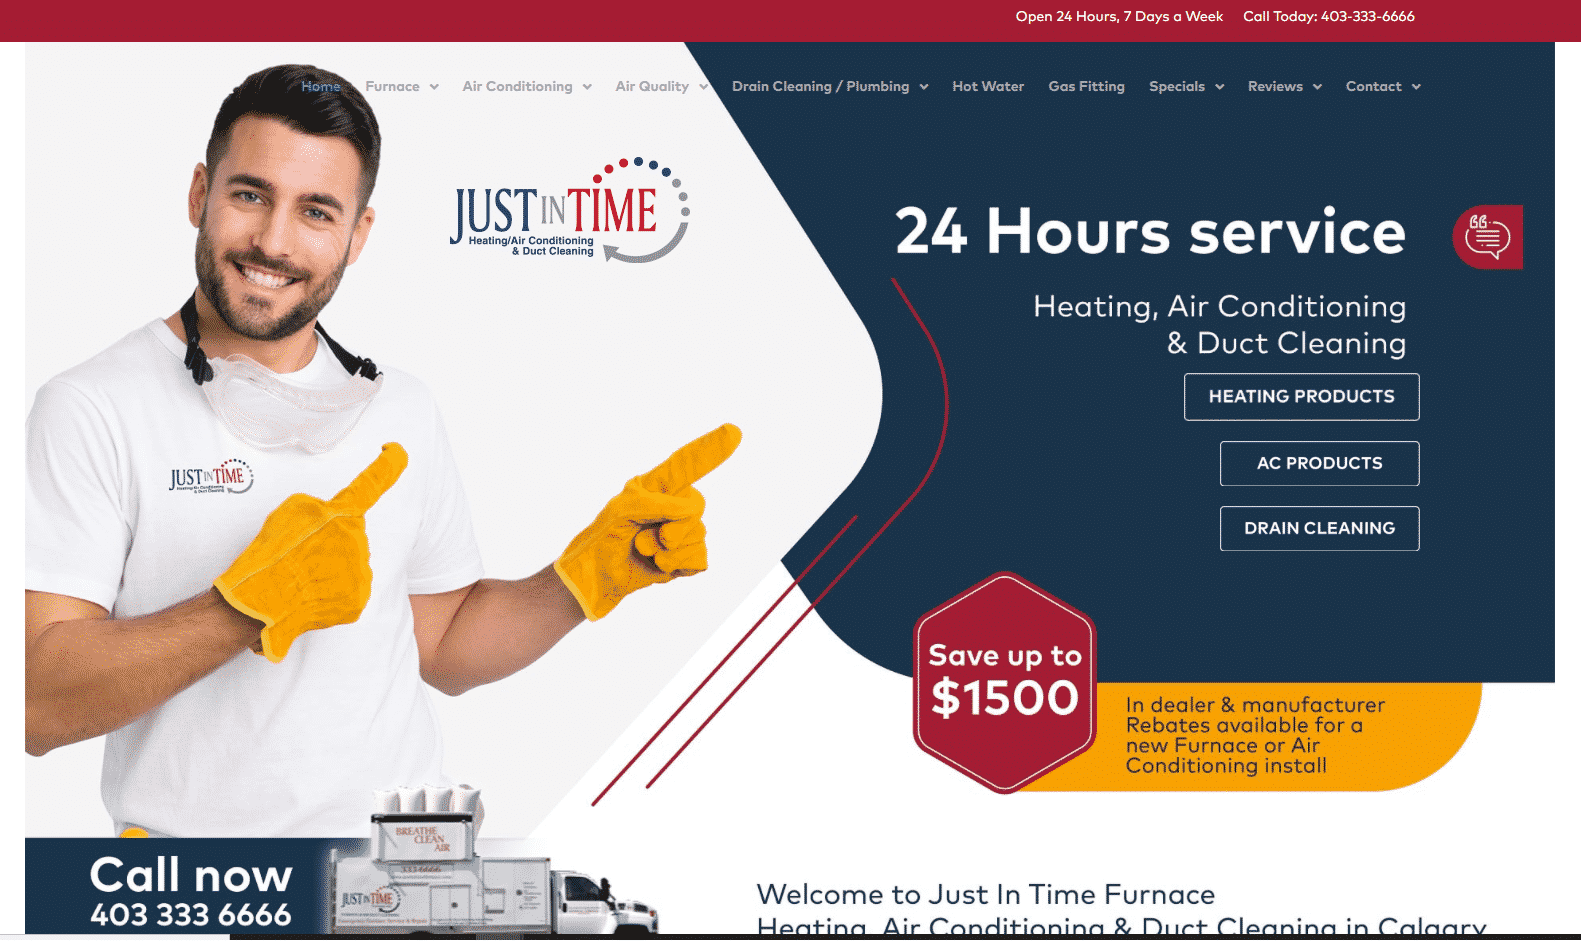 Just in Time Plumbing & Heating